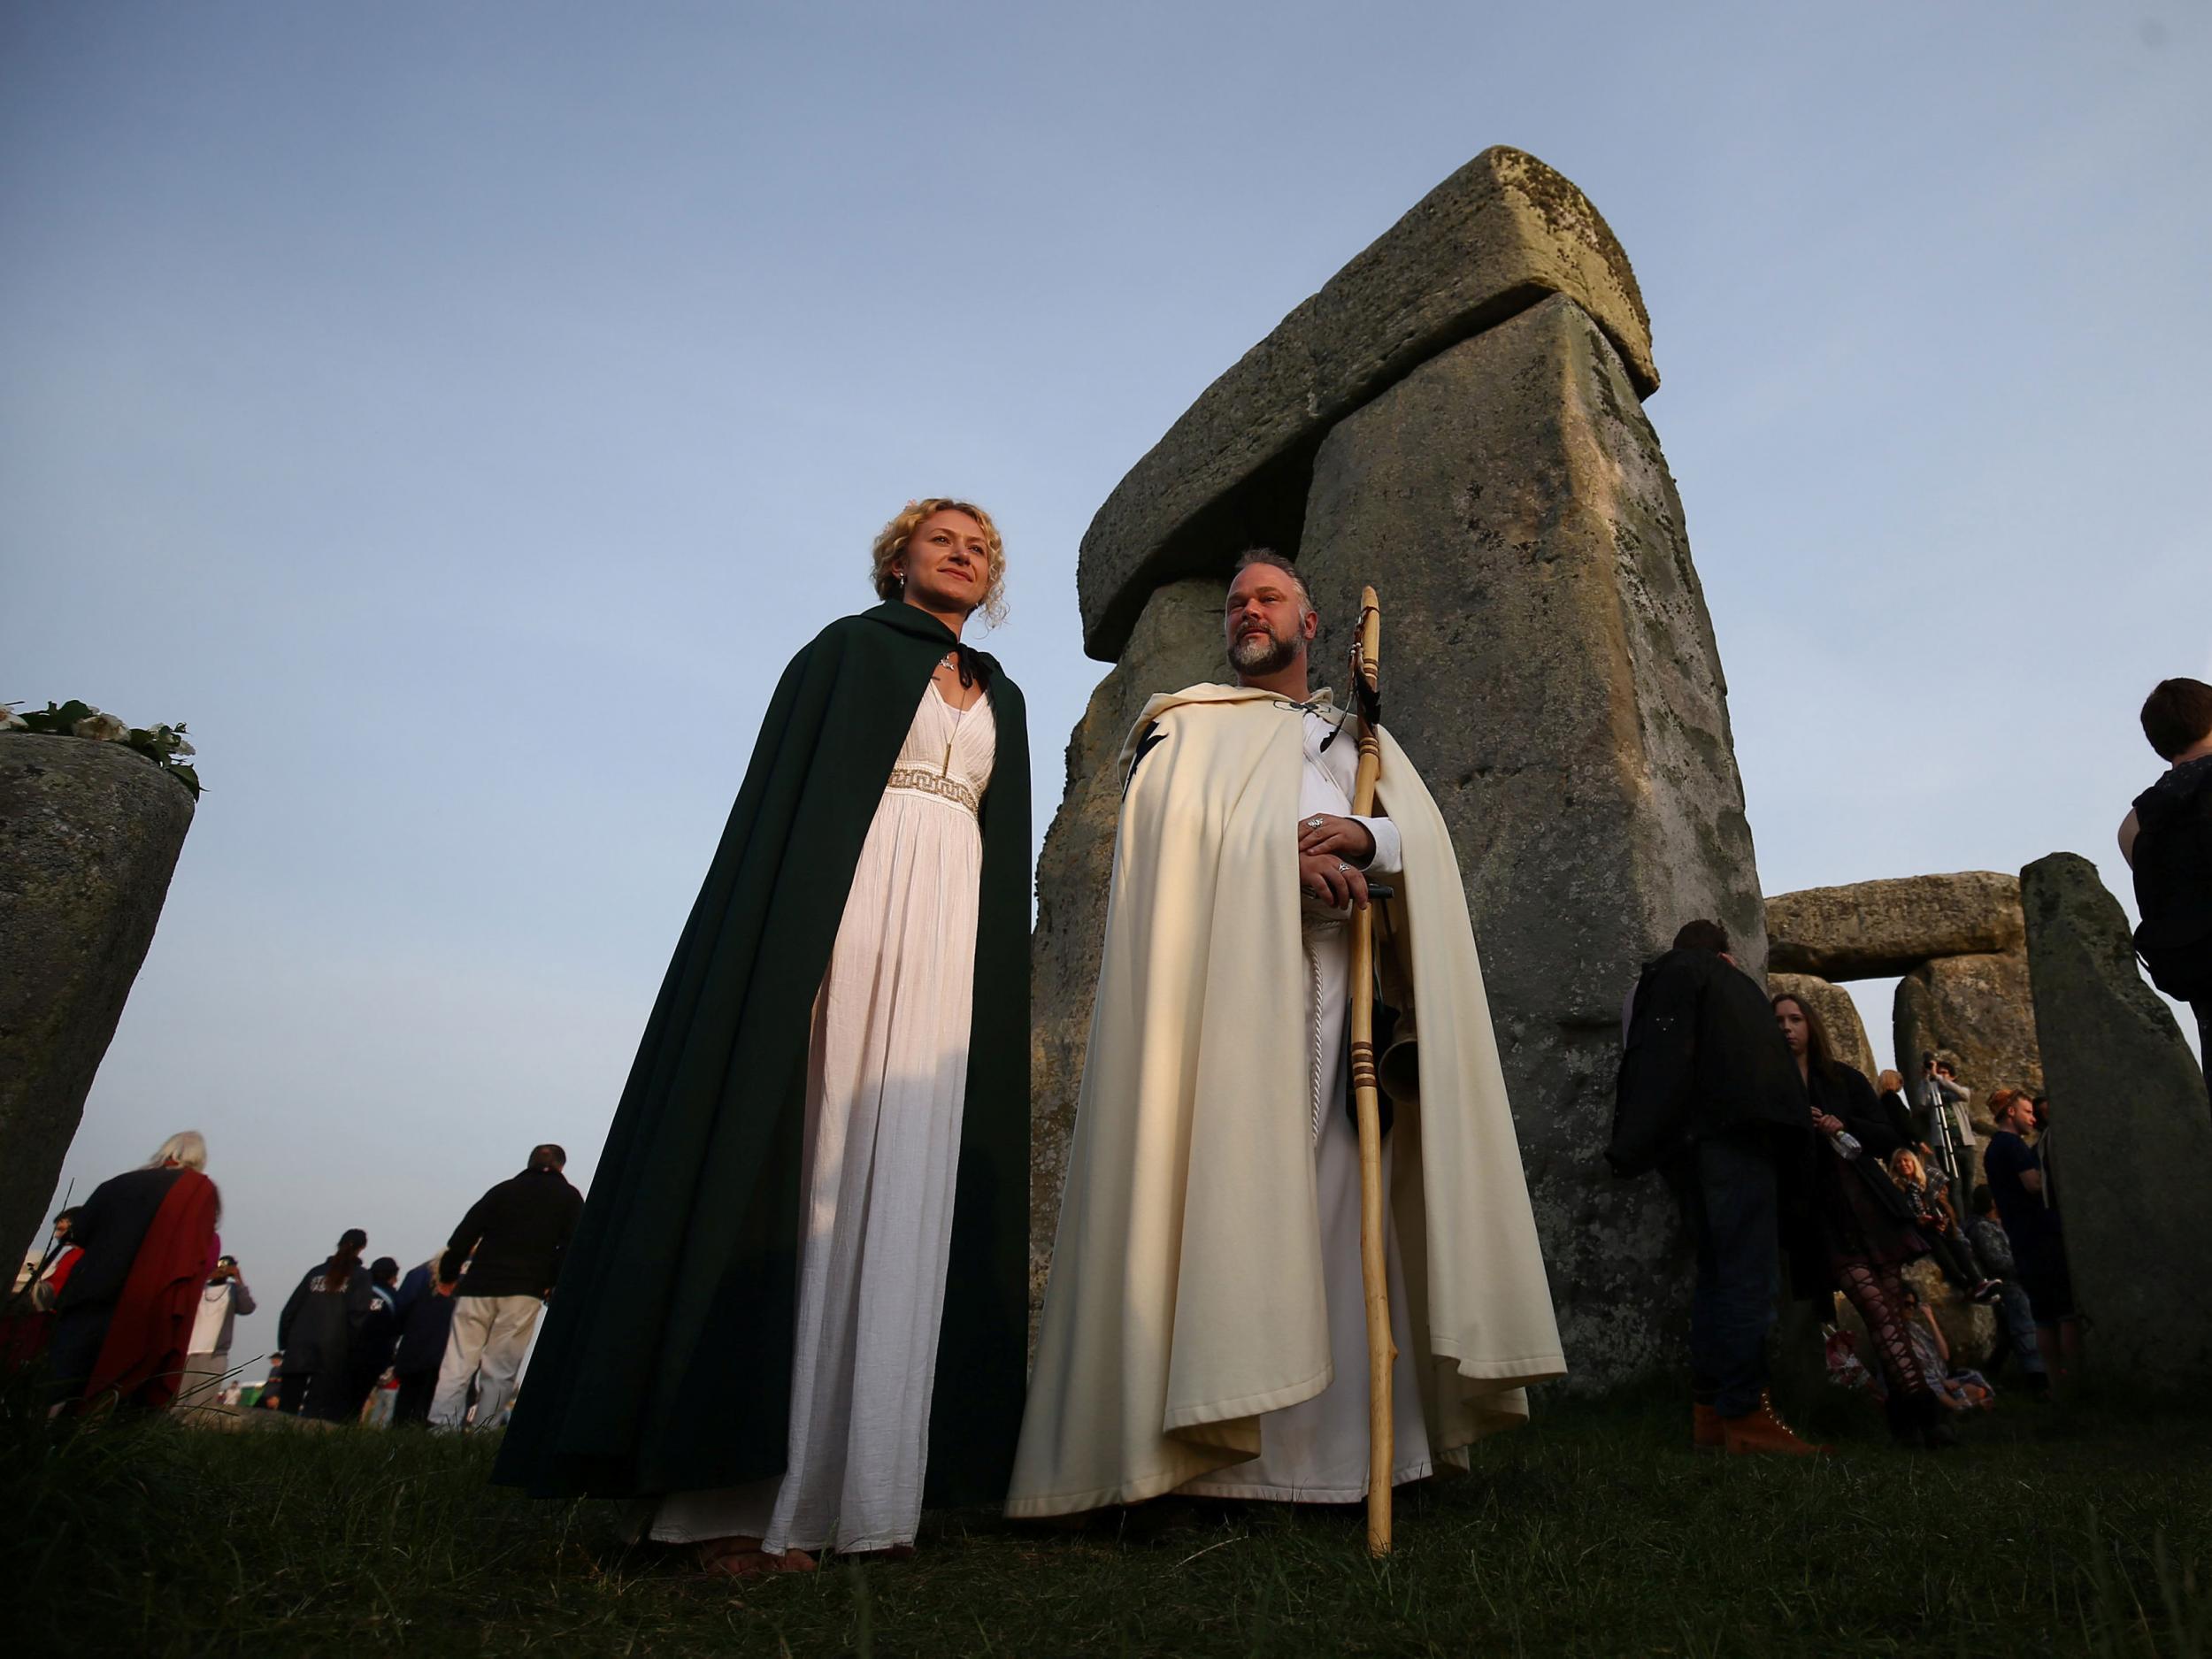 Those clothed in druid costume watch the sun rise on the Stonehenge monument